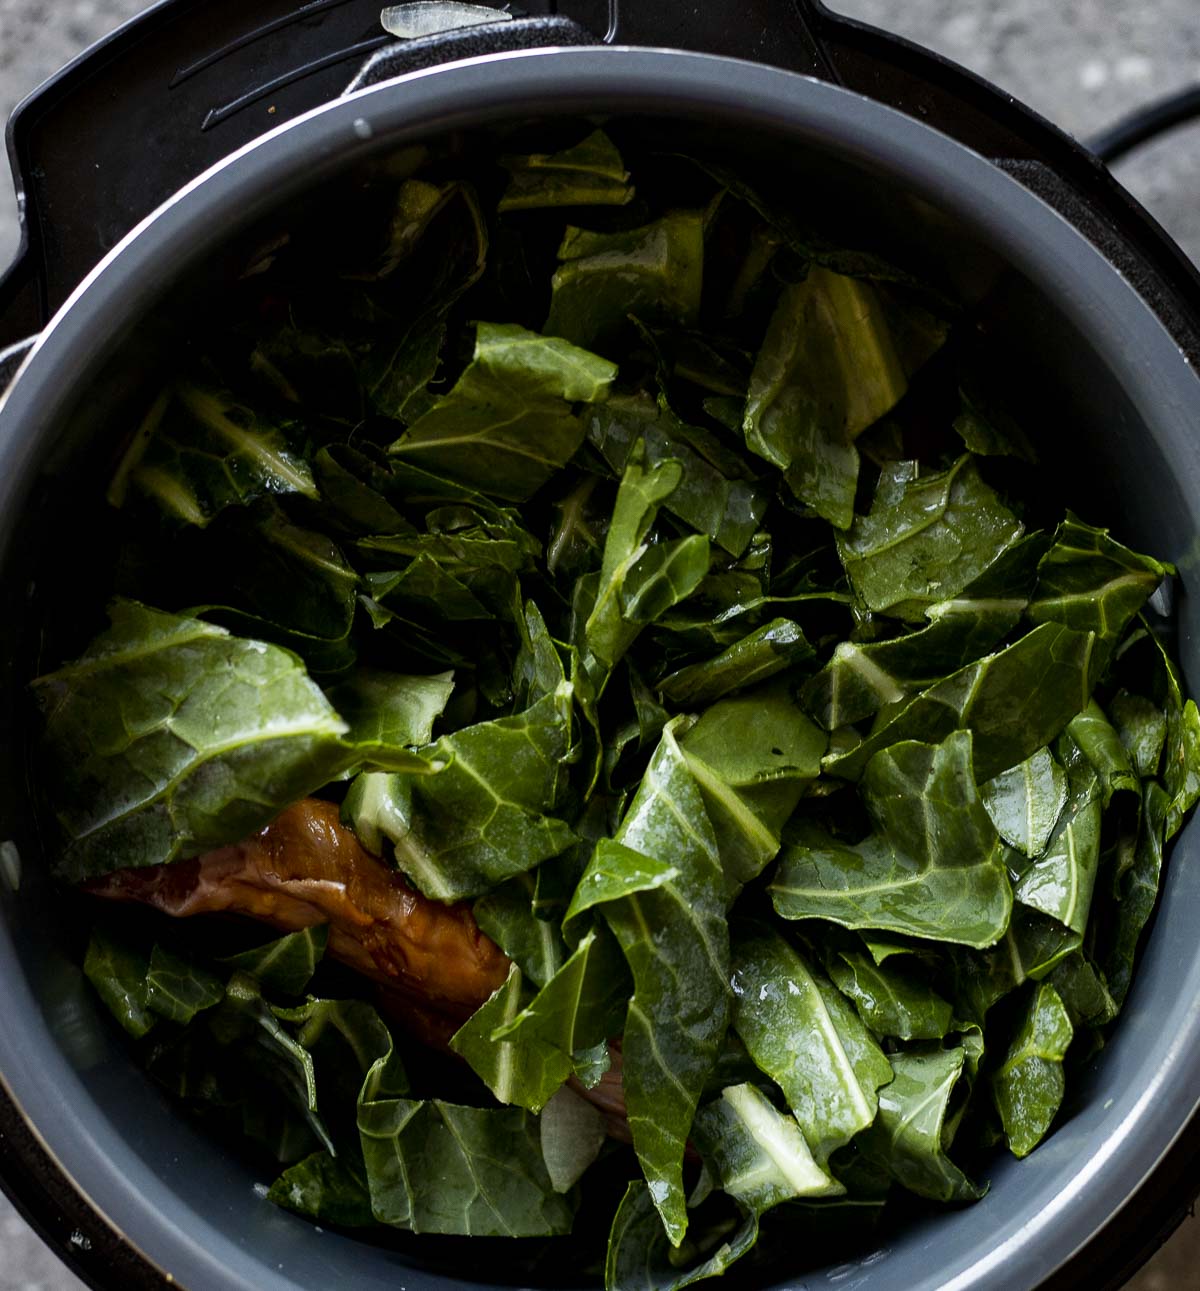 Chopped collard greens and smoked turkey wings in the Instant Pot insert.